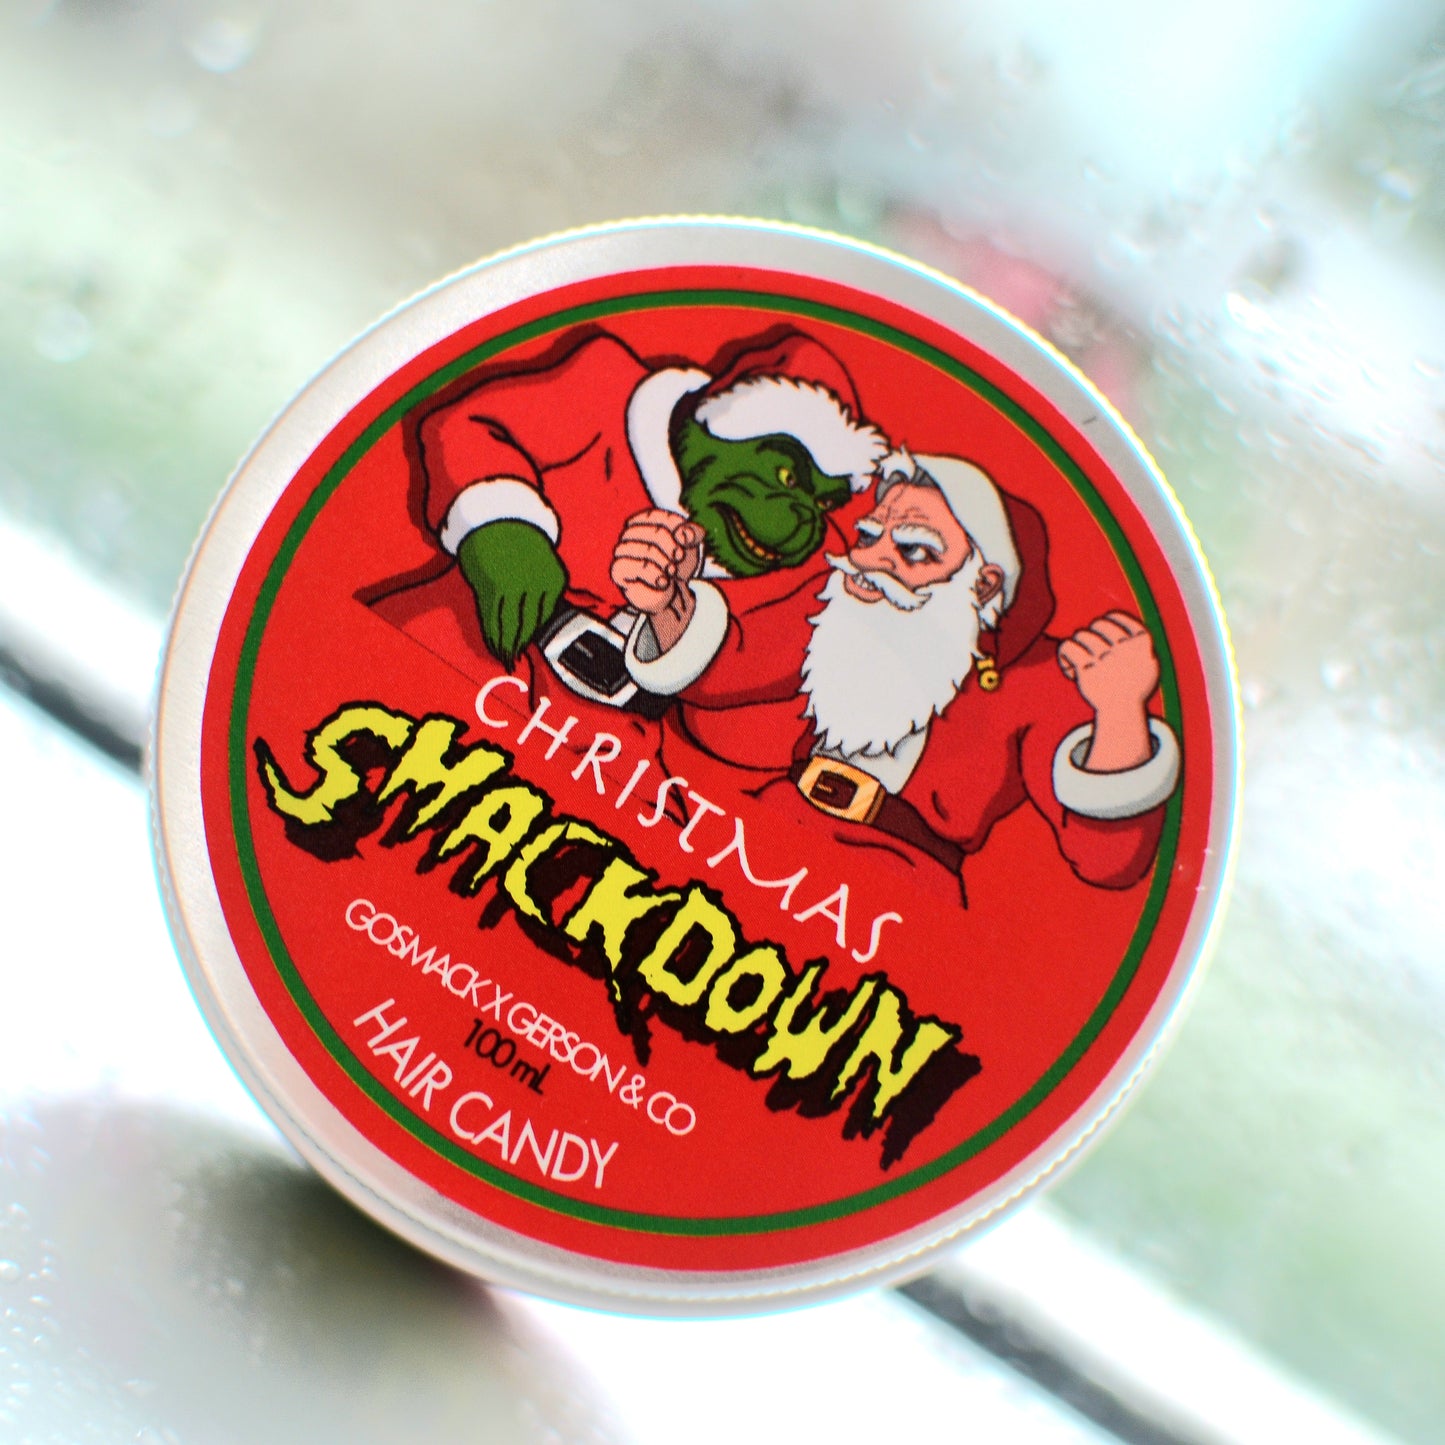 *NEW Limited Edition* Christmas Smackdown [GOSMACK X Gerson & Co.]